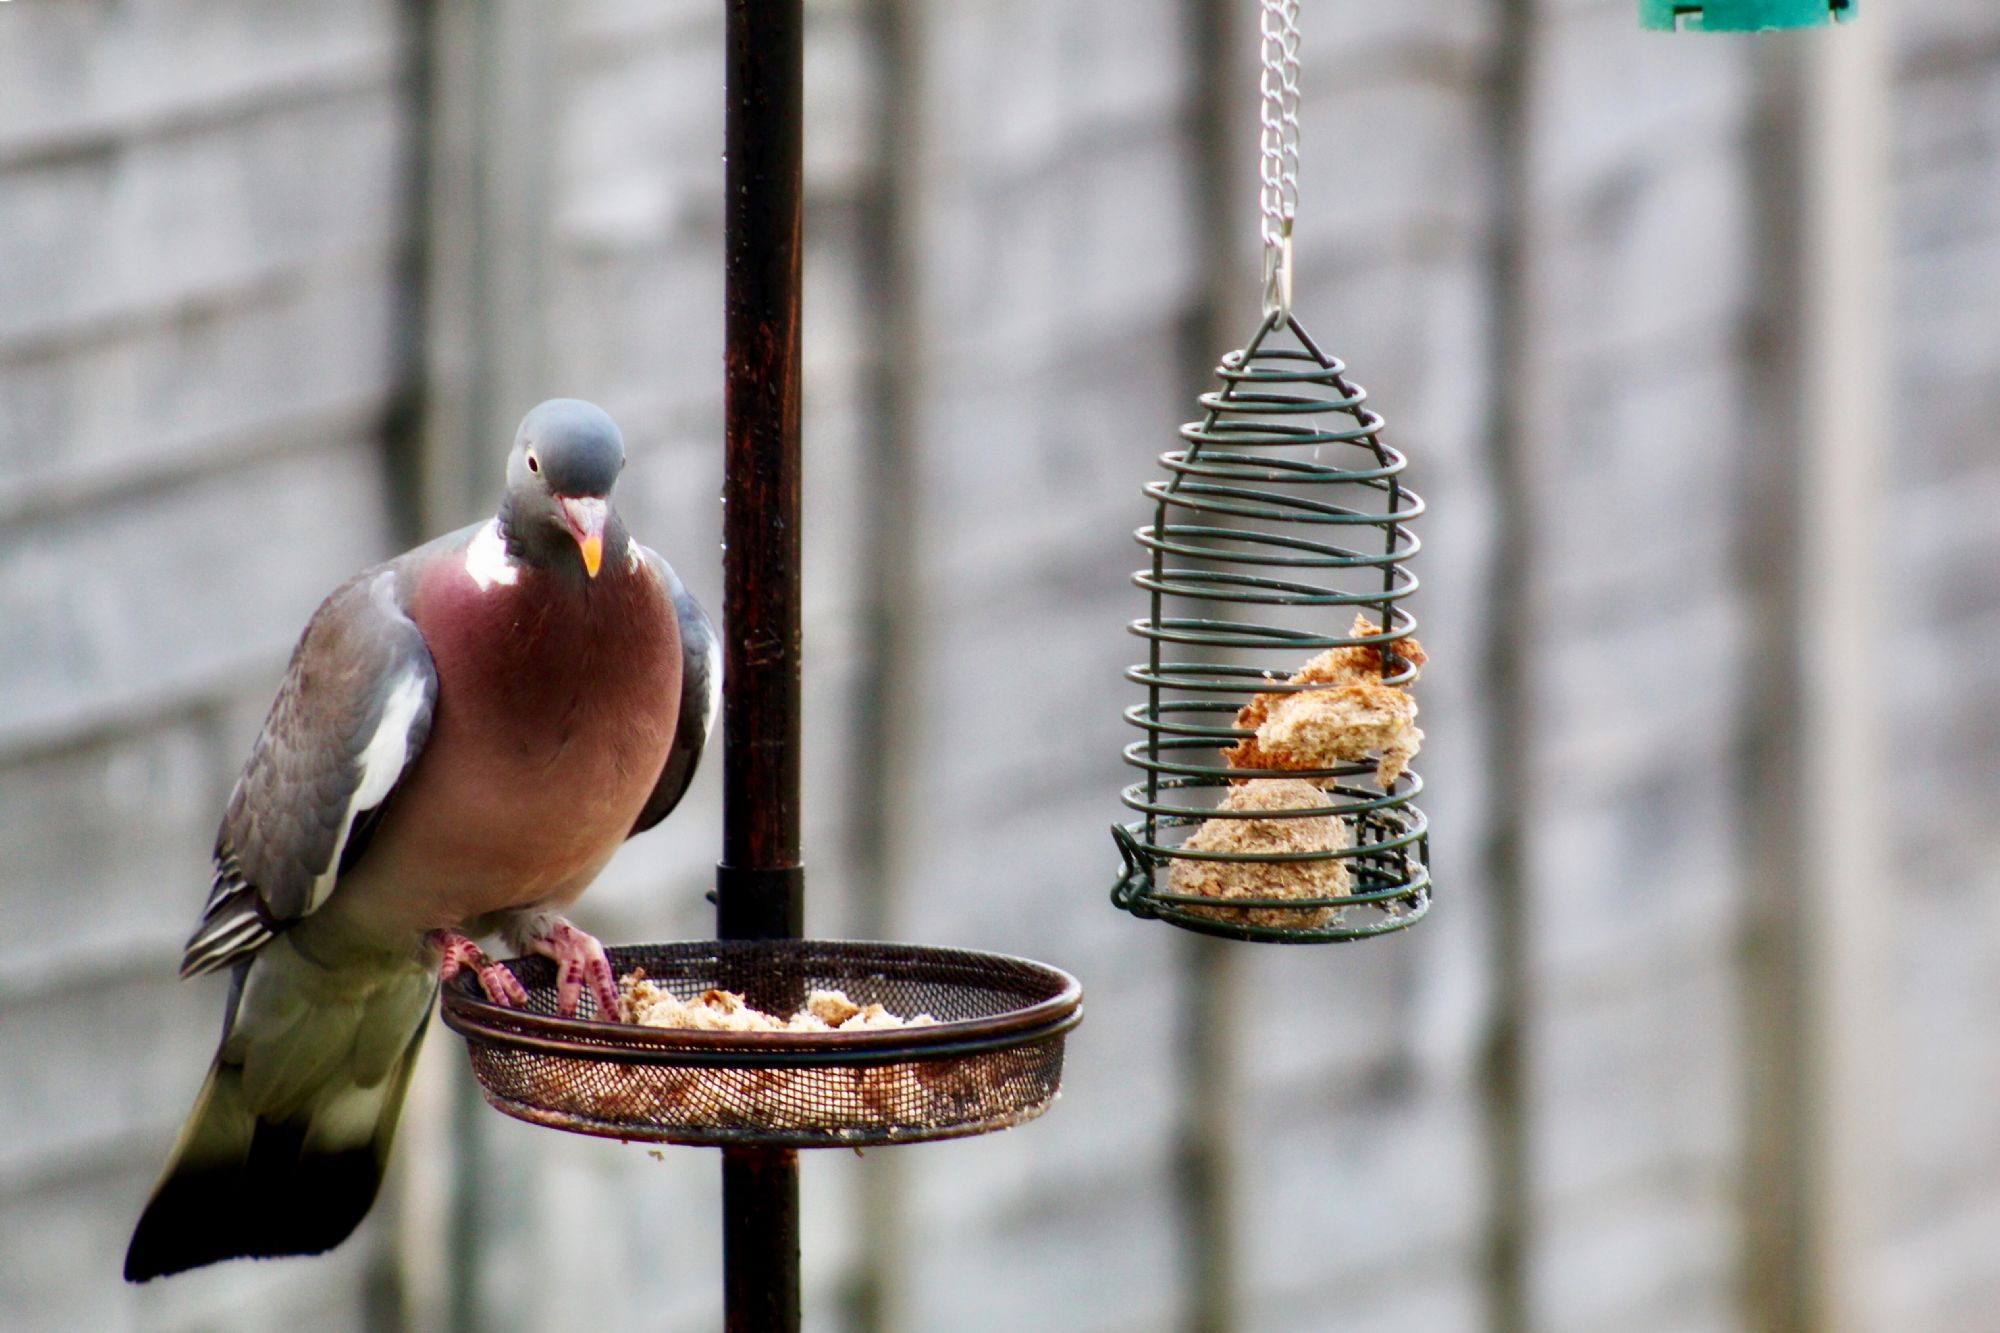 How to keep pigeons away from bird feeders?